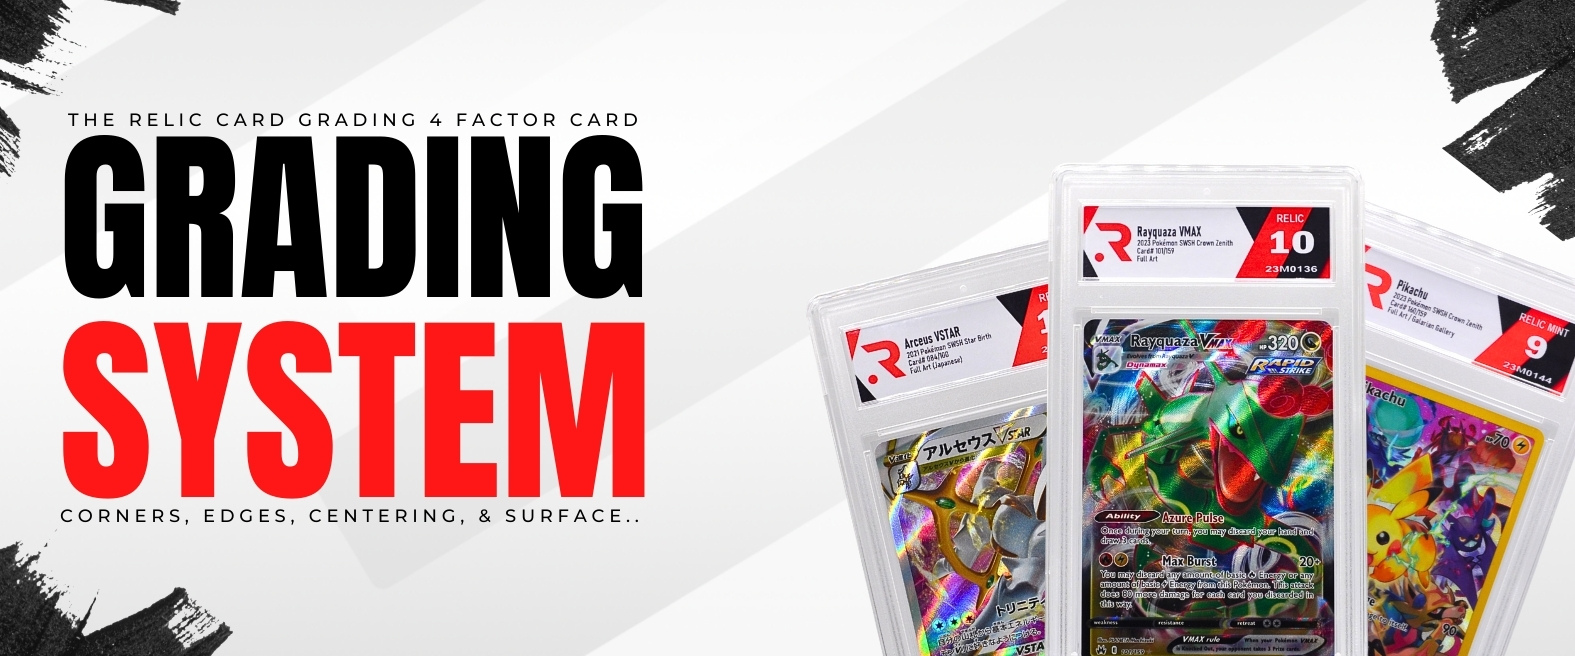 Relic Card Grading - 4 Factor Card Grading System and Card Grading Scale